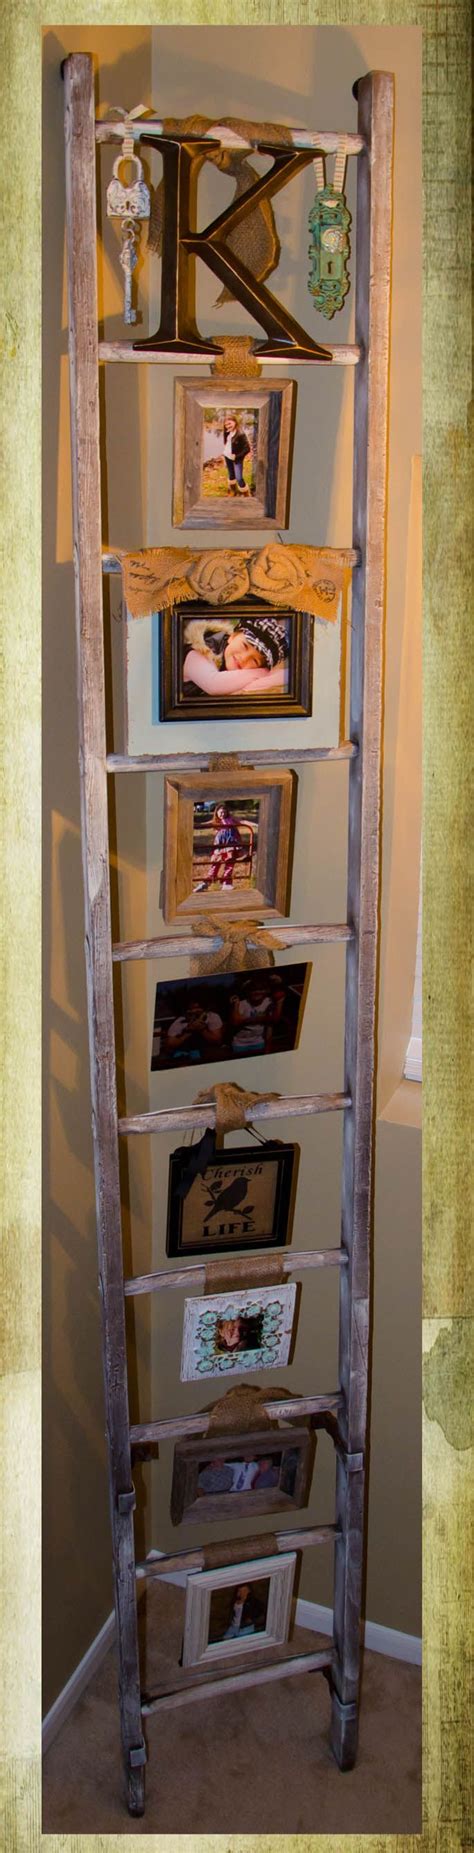 Old Ladder Repurposed As A Photo Display Ladder Decor Repurposed